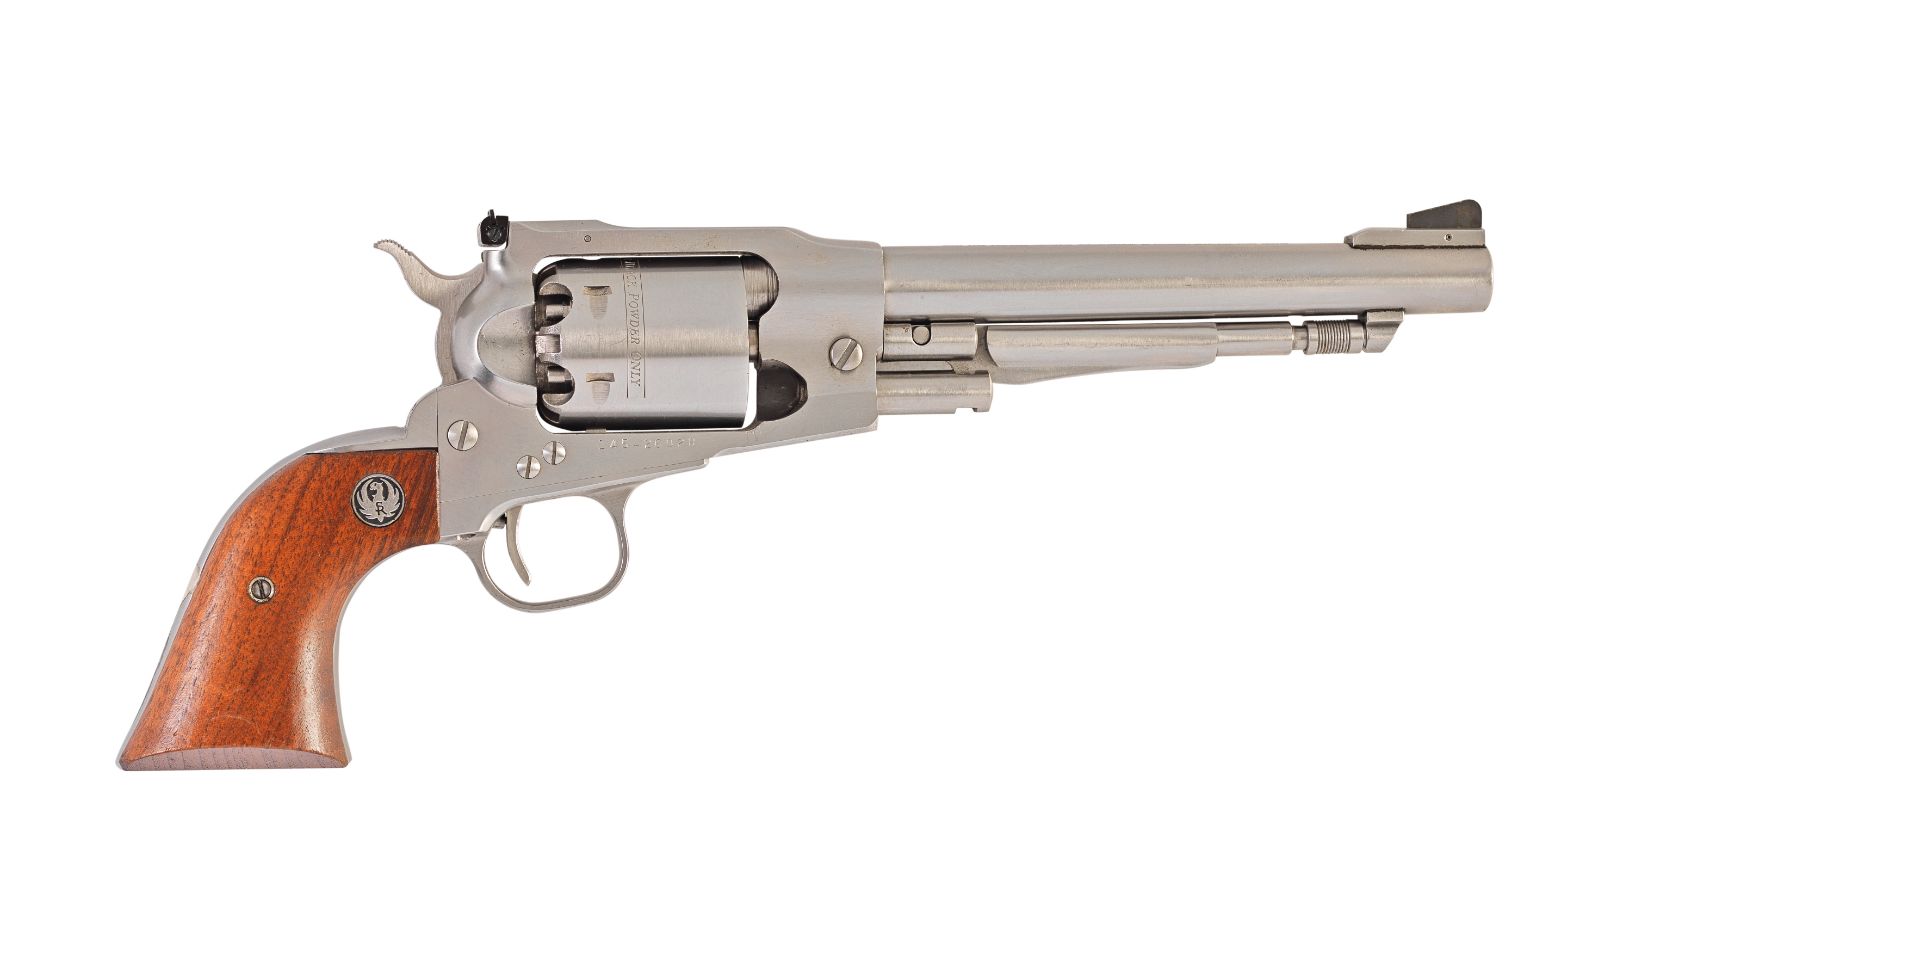 A .45 'Old Army' percussion revolver by Ruger, no. 145-26028